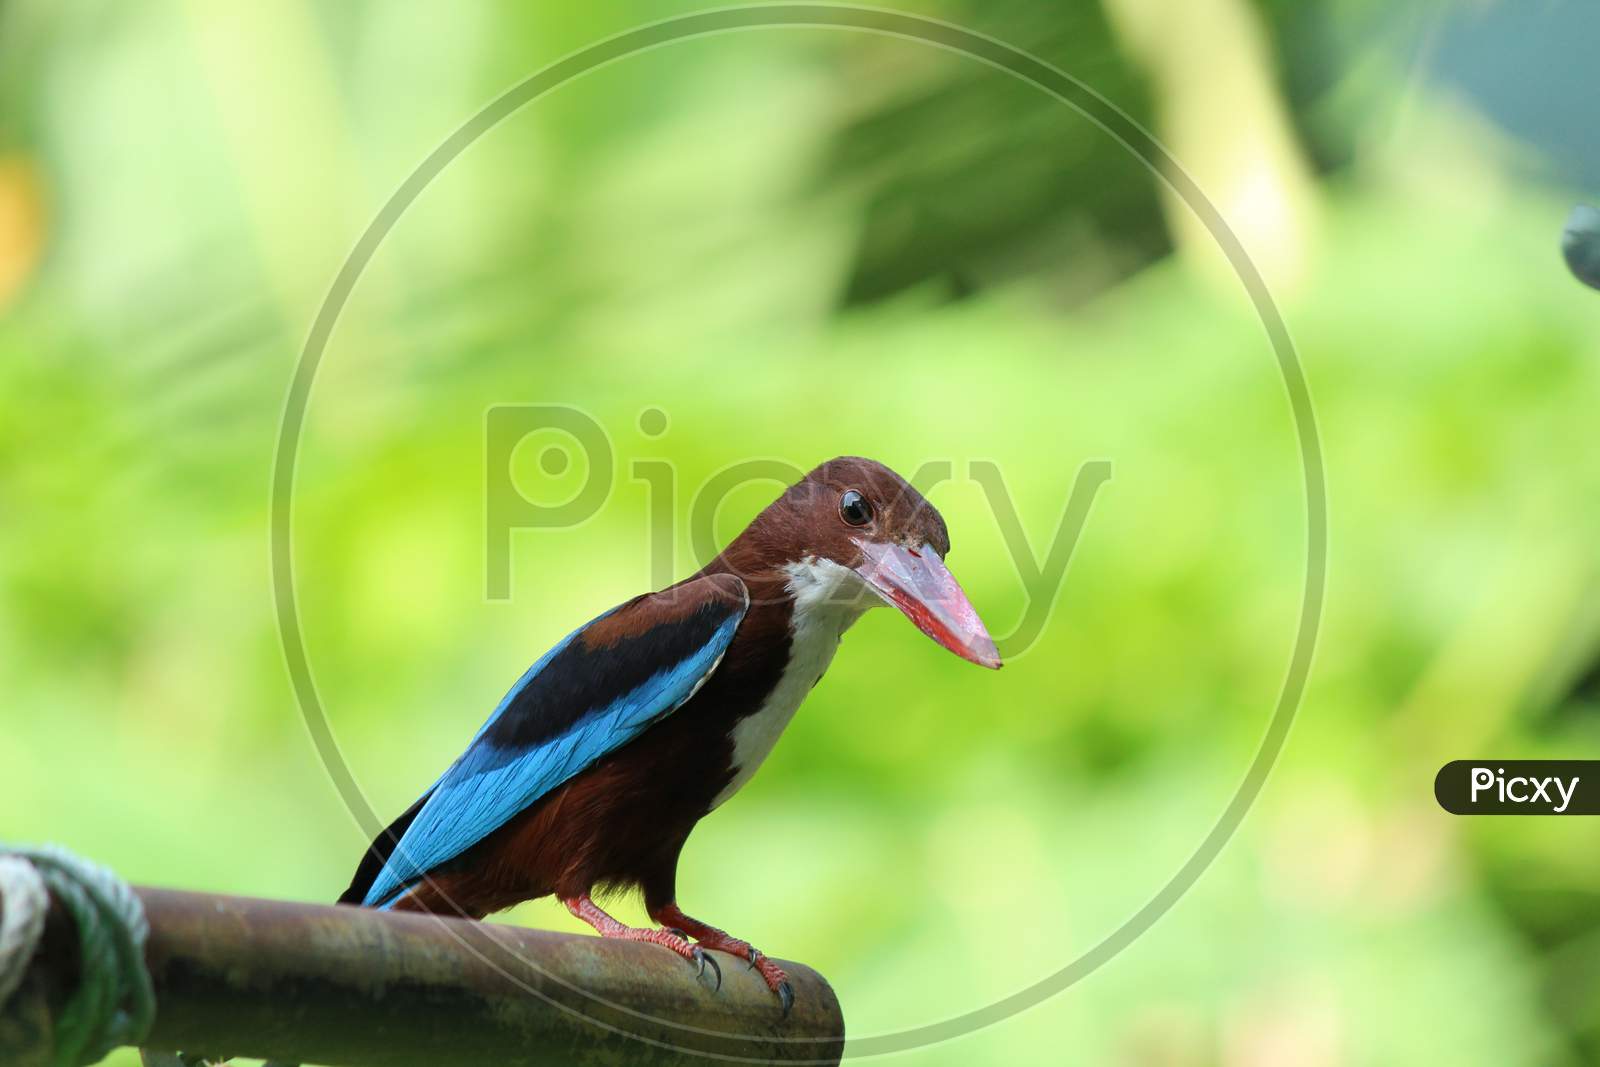 White Throated Kingfisher On The Metal Stand.